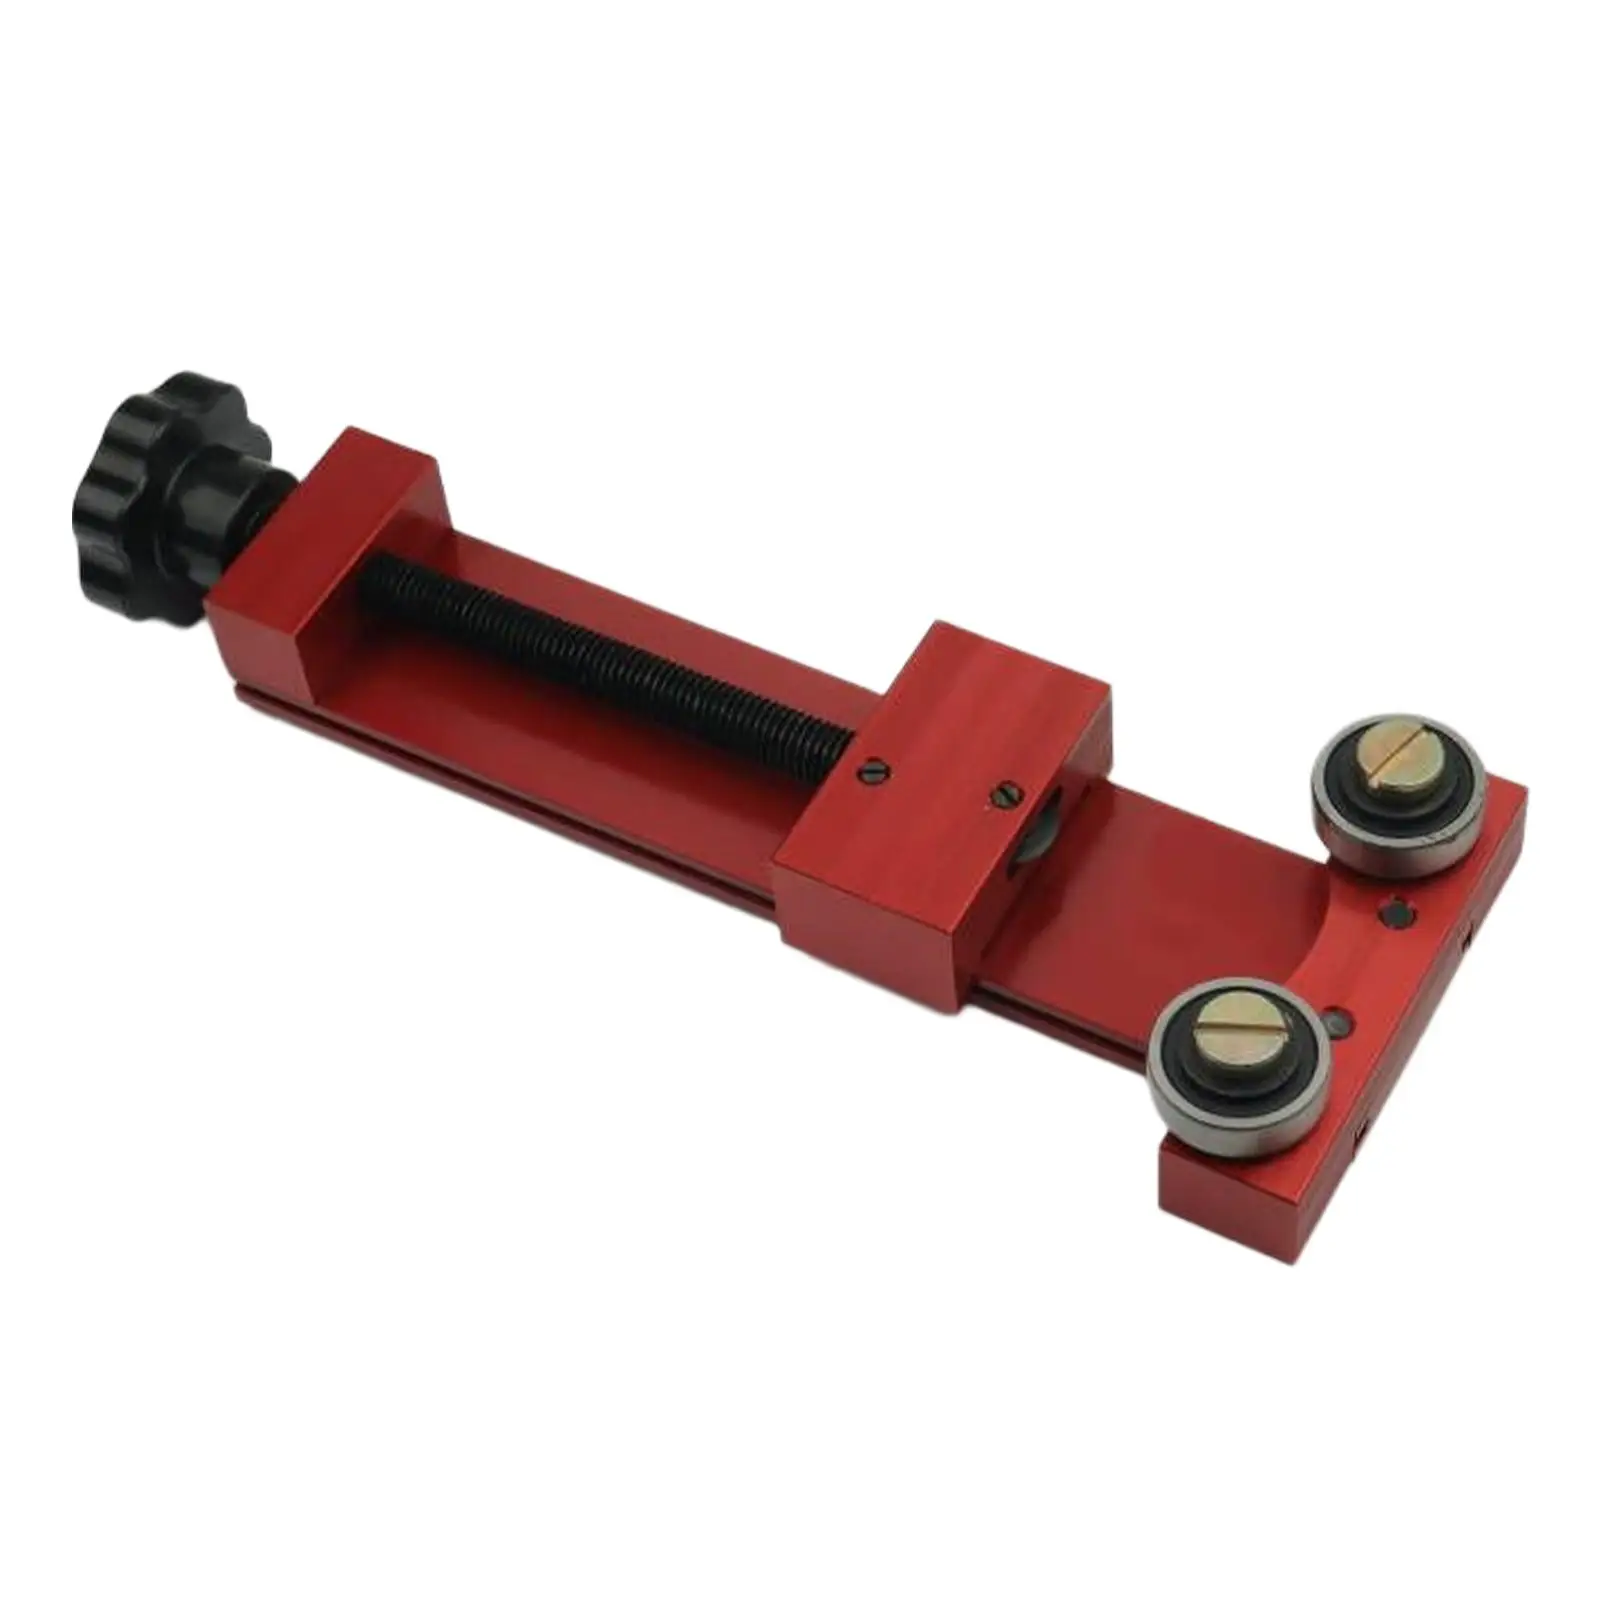 Oil Filter Cutter 66490 Professional Supplies Aluminum Alloy High Performance Accessory Cutting Tool Vehicle for Oil Filter